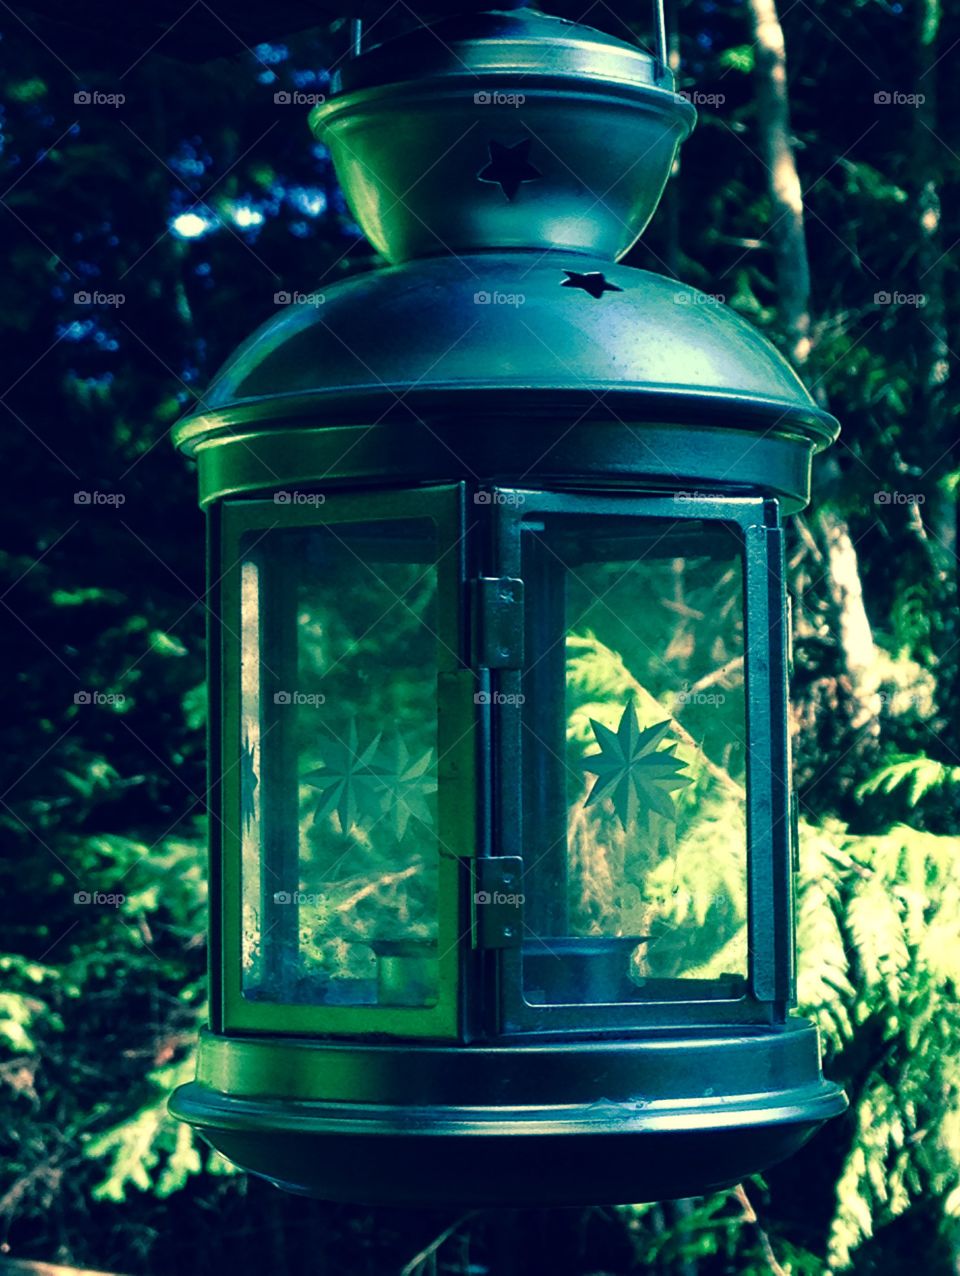 My Garden lamp candle